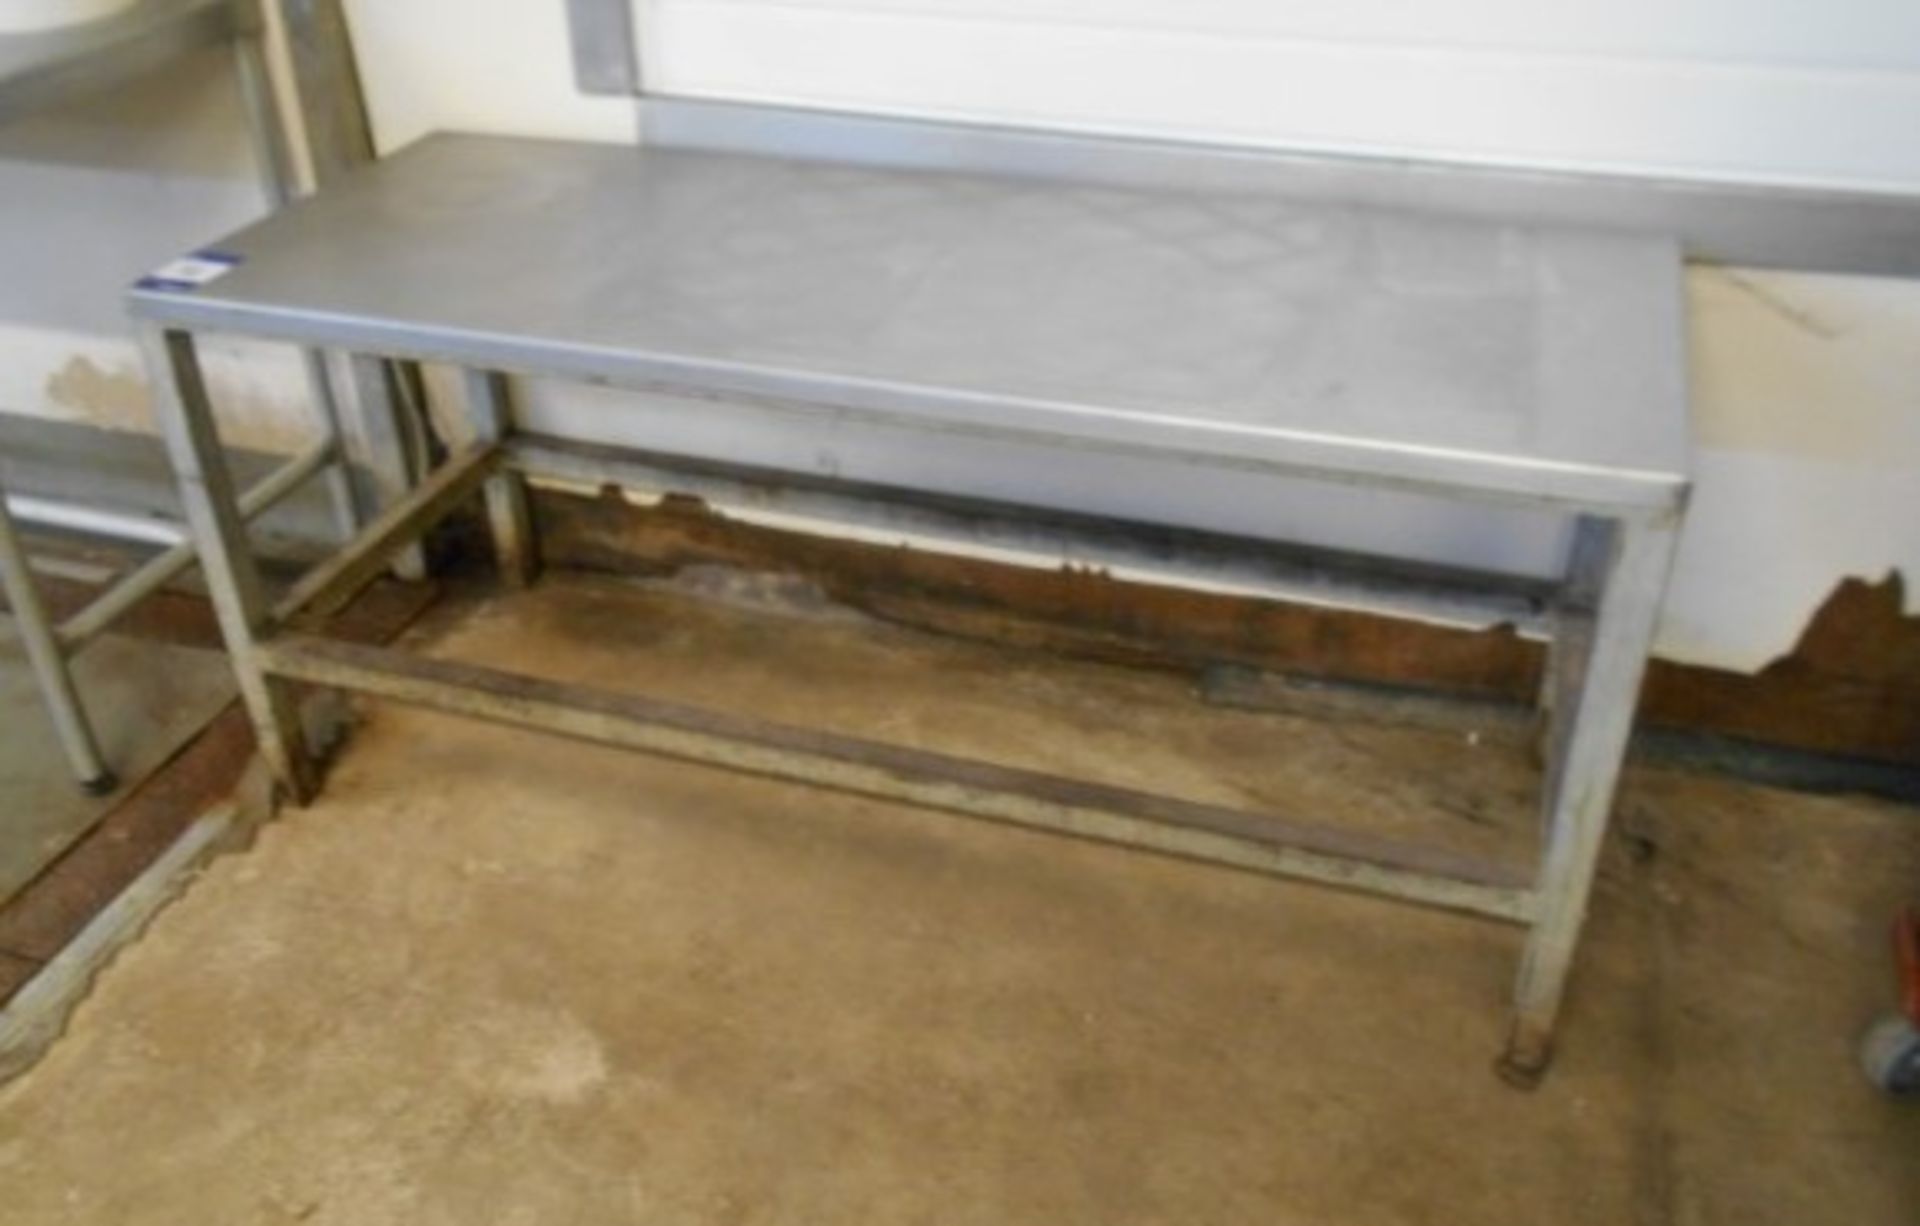 2 Various Stainless Steel Preparation Tables - Image 2 of 2